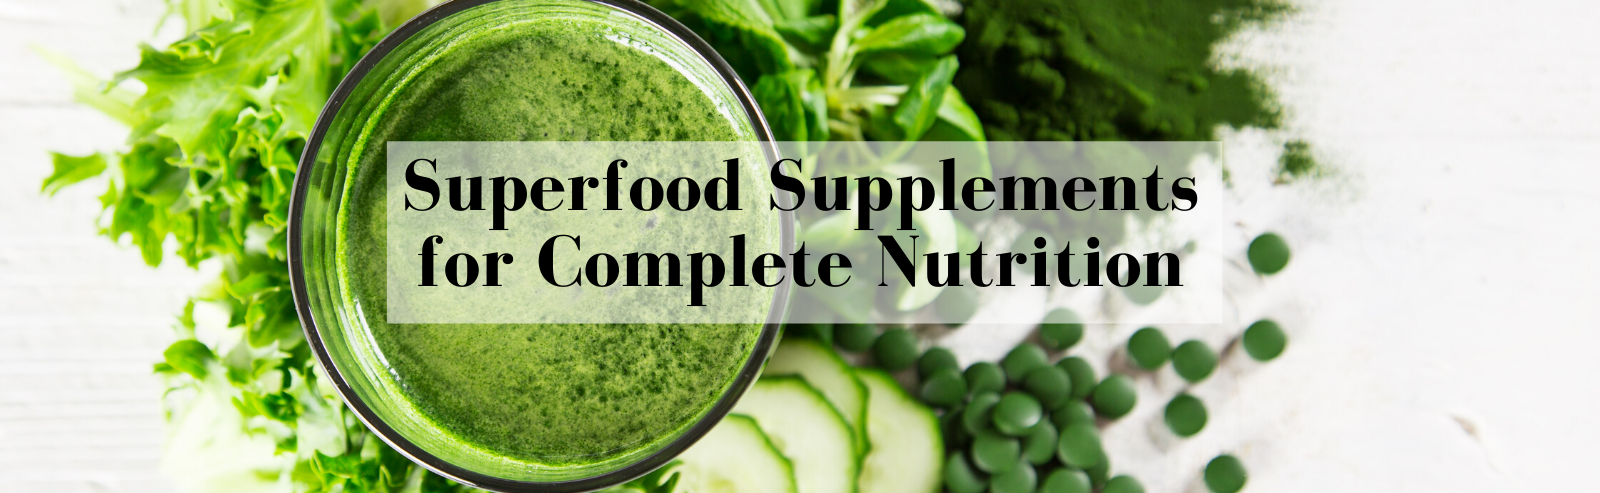 BioHealth Nutrition - Organic Superfood Supplements Powders